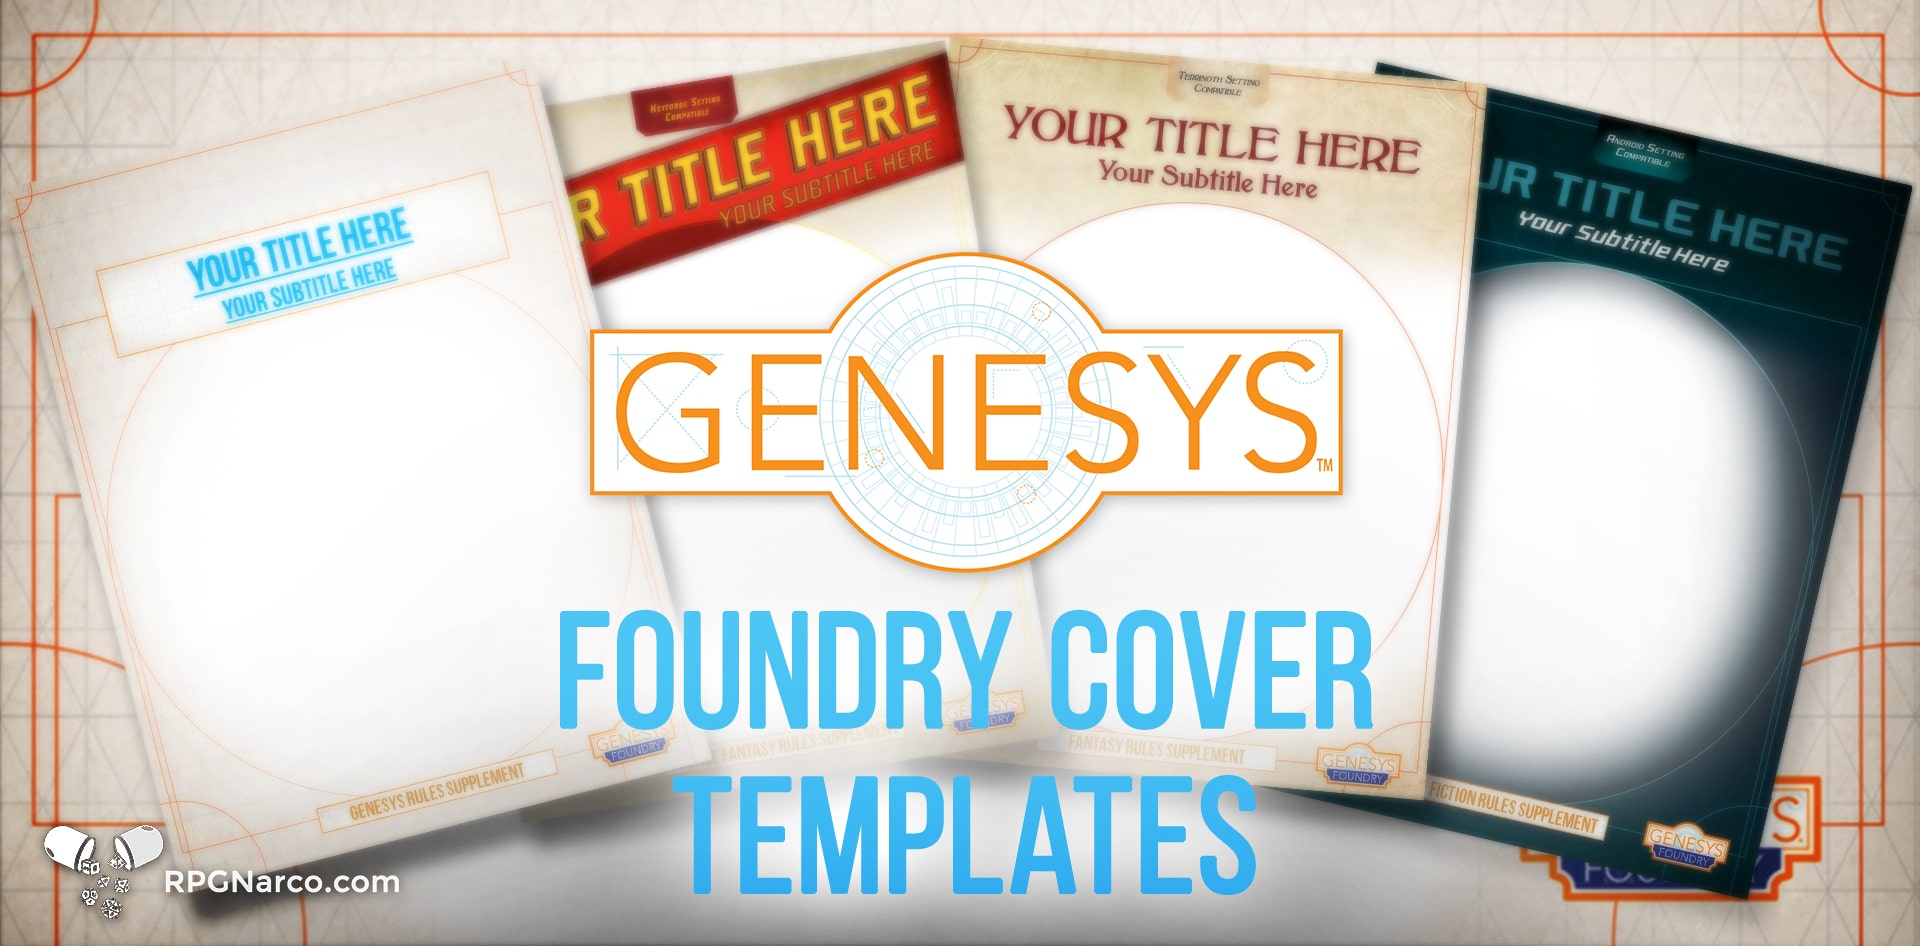 Genesys Foundry Cover Templates 01